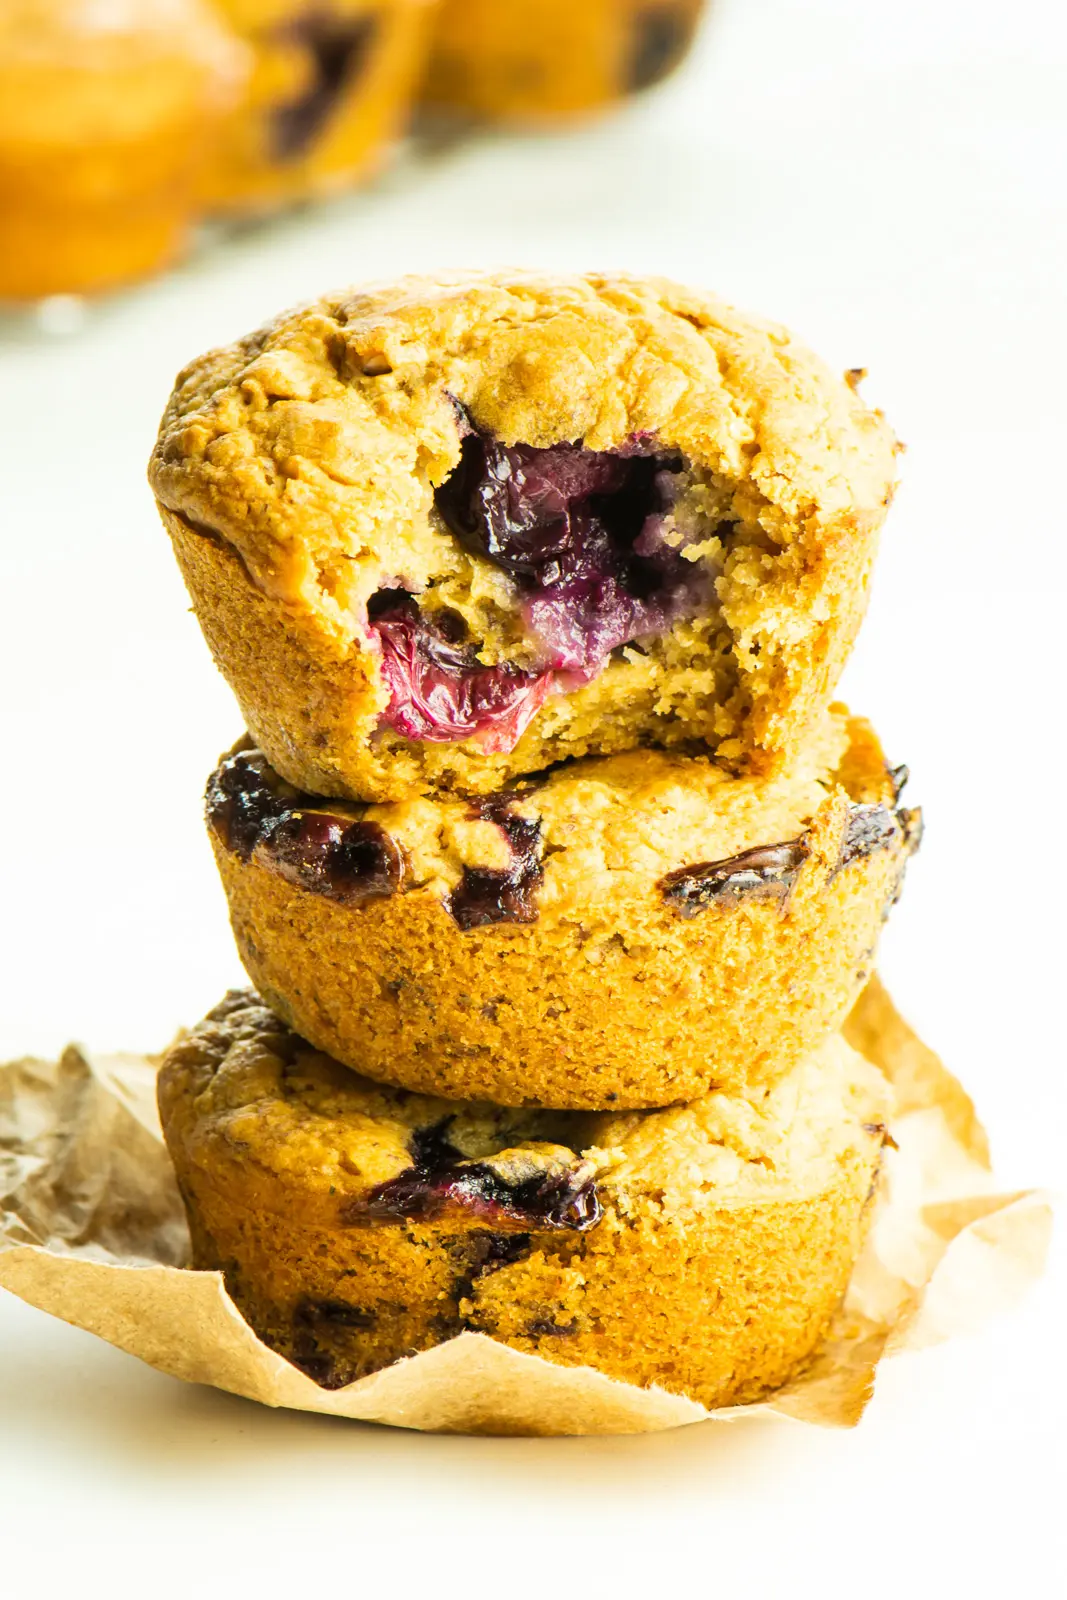 Three vegan blueberry muffins are stacked on top of each other and a bite is taken out of the top one.